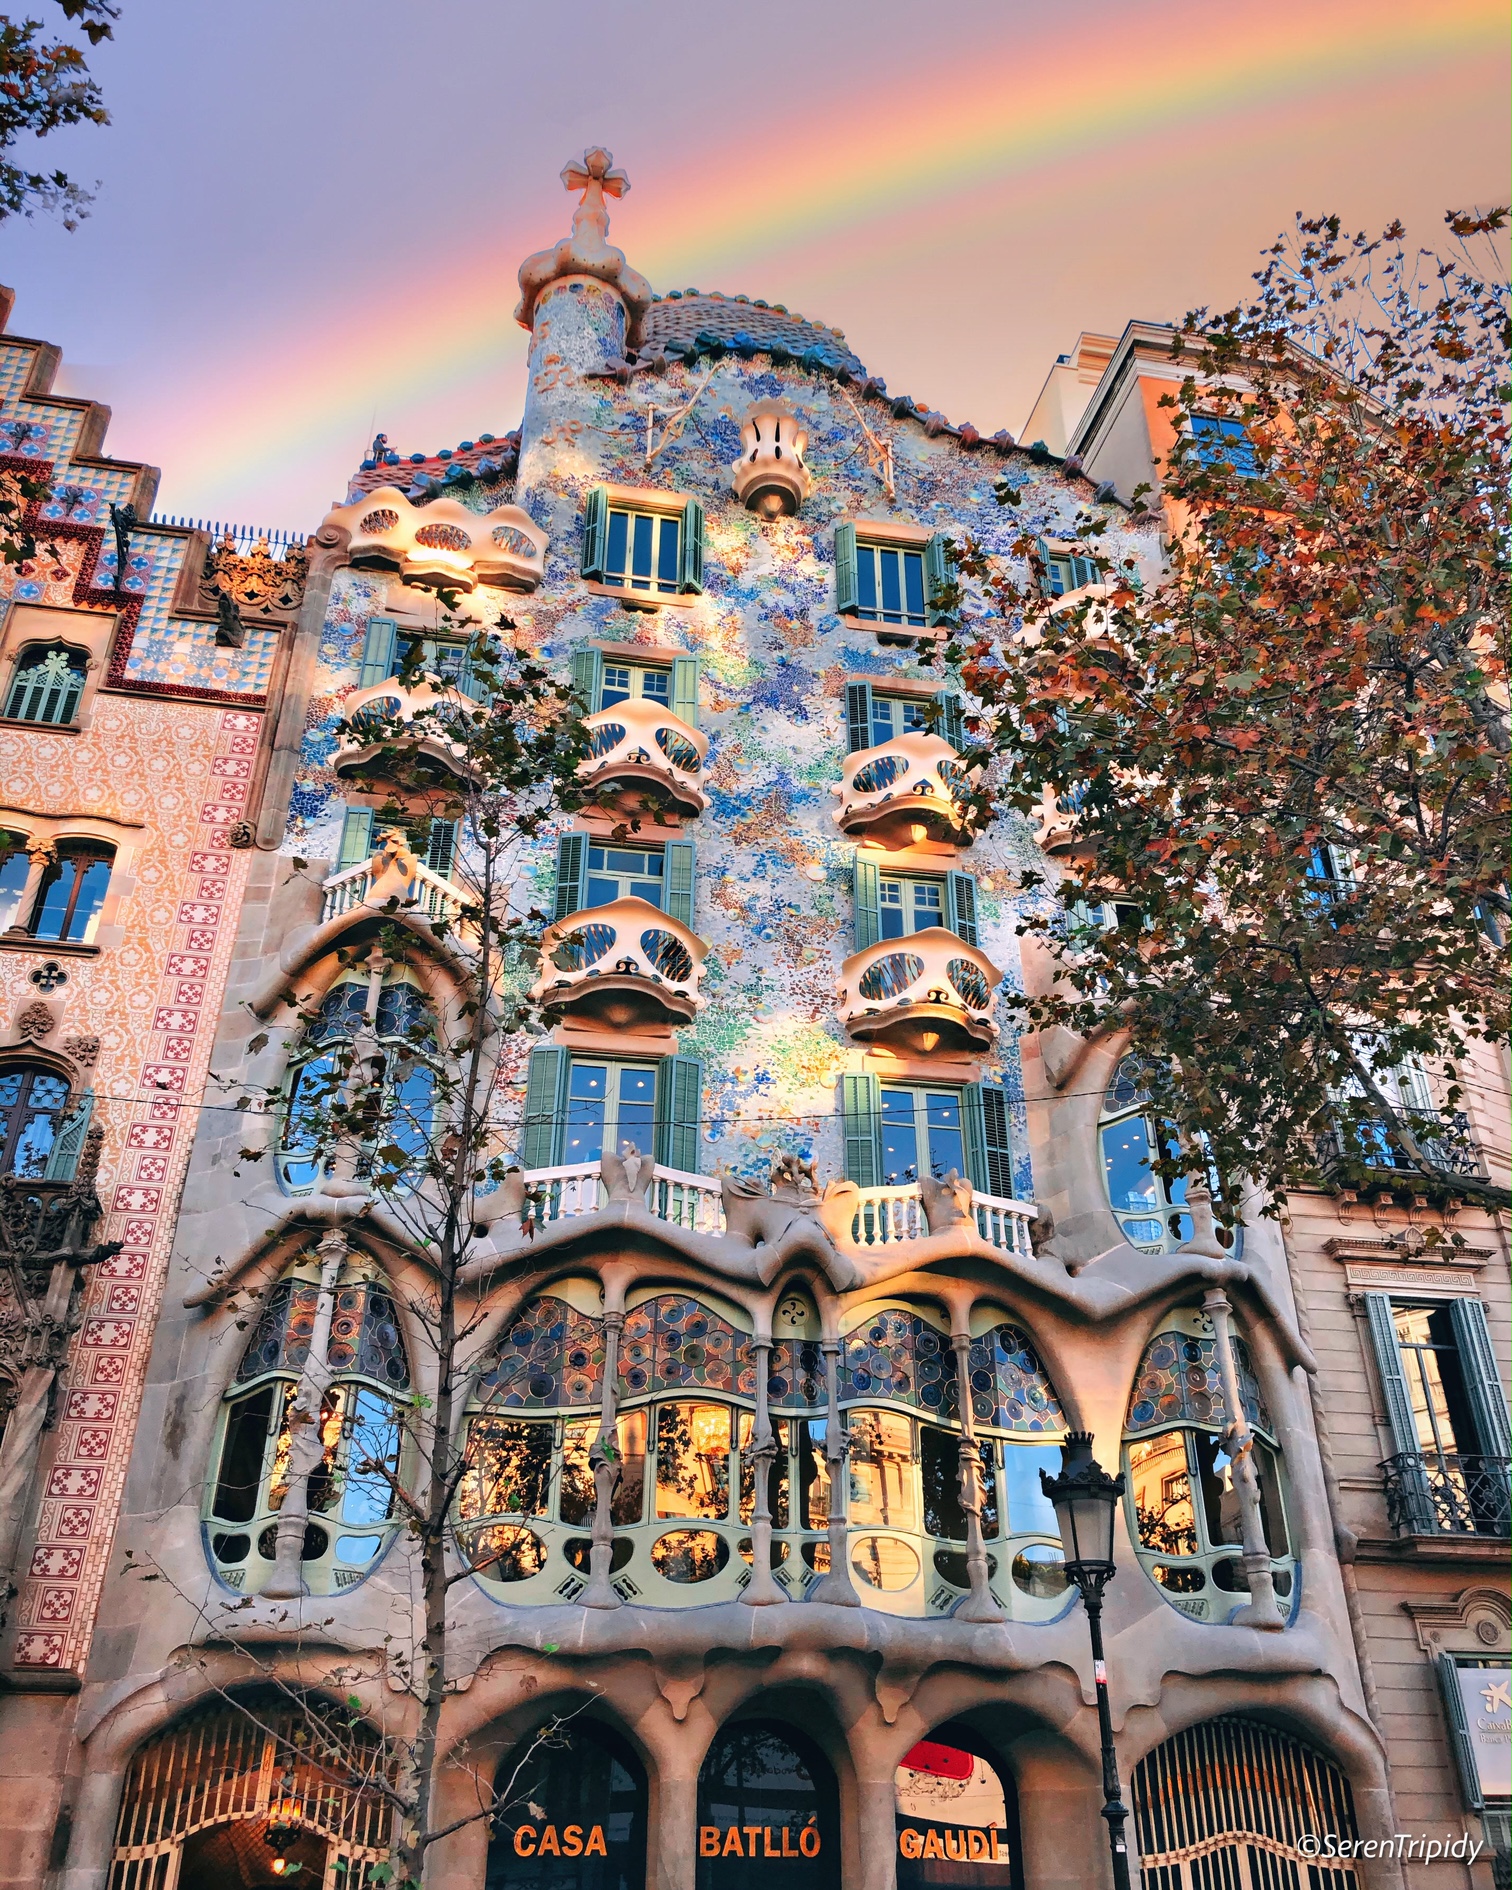 <p>local name for the building is Casa dels ossos (House of Bones. It is located on the Passeig de Gràcia in the Eixample district. Casa Batlló is only identifiable as Modernisme or Art Nouveau in the broadest sense.</p>